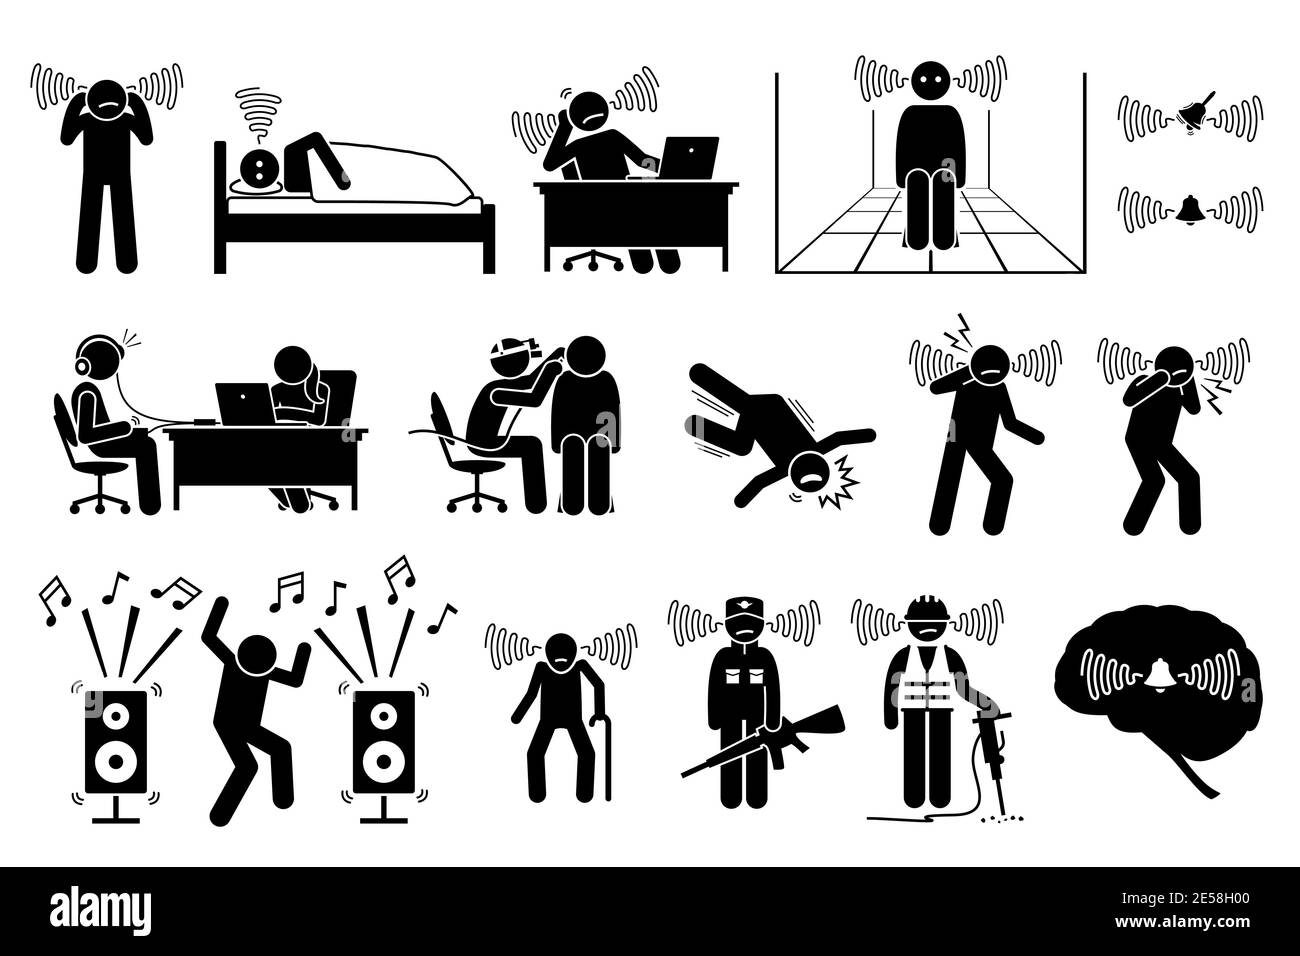 Tinnitus ear ringing noise in people icons. Vector illustrations of a man having tinnitus and experiencing a noisy sound in the ears. Stock Vector